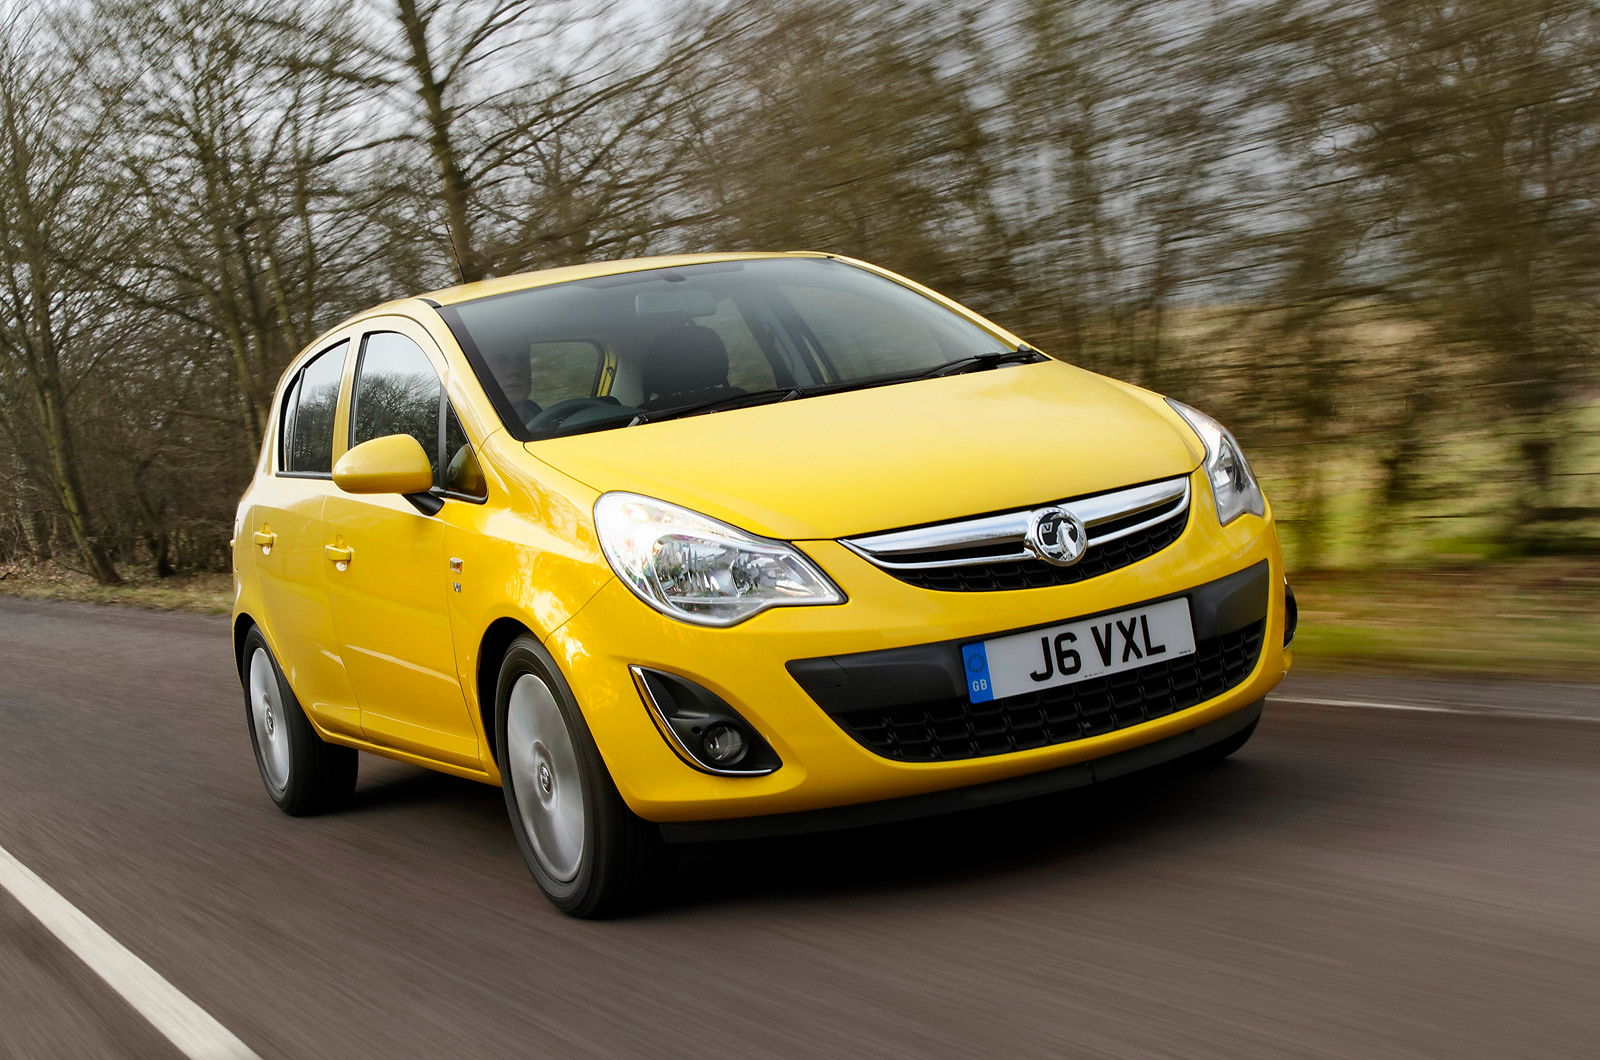 Vauxhall Corsa D (2006-2014) used car buying guide